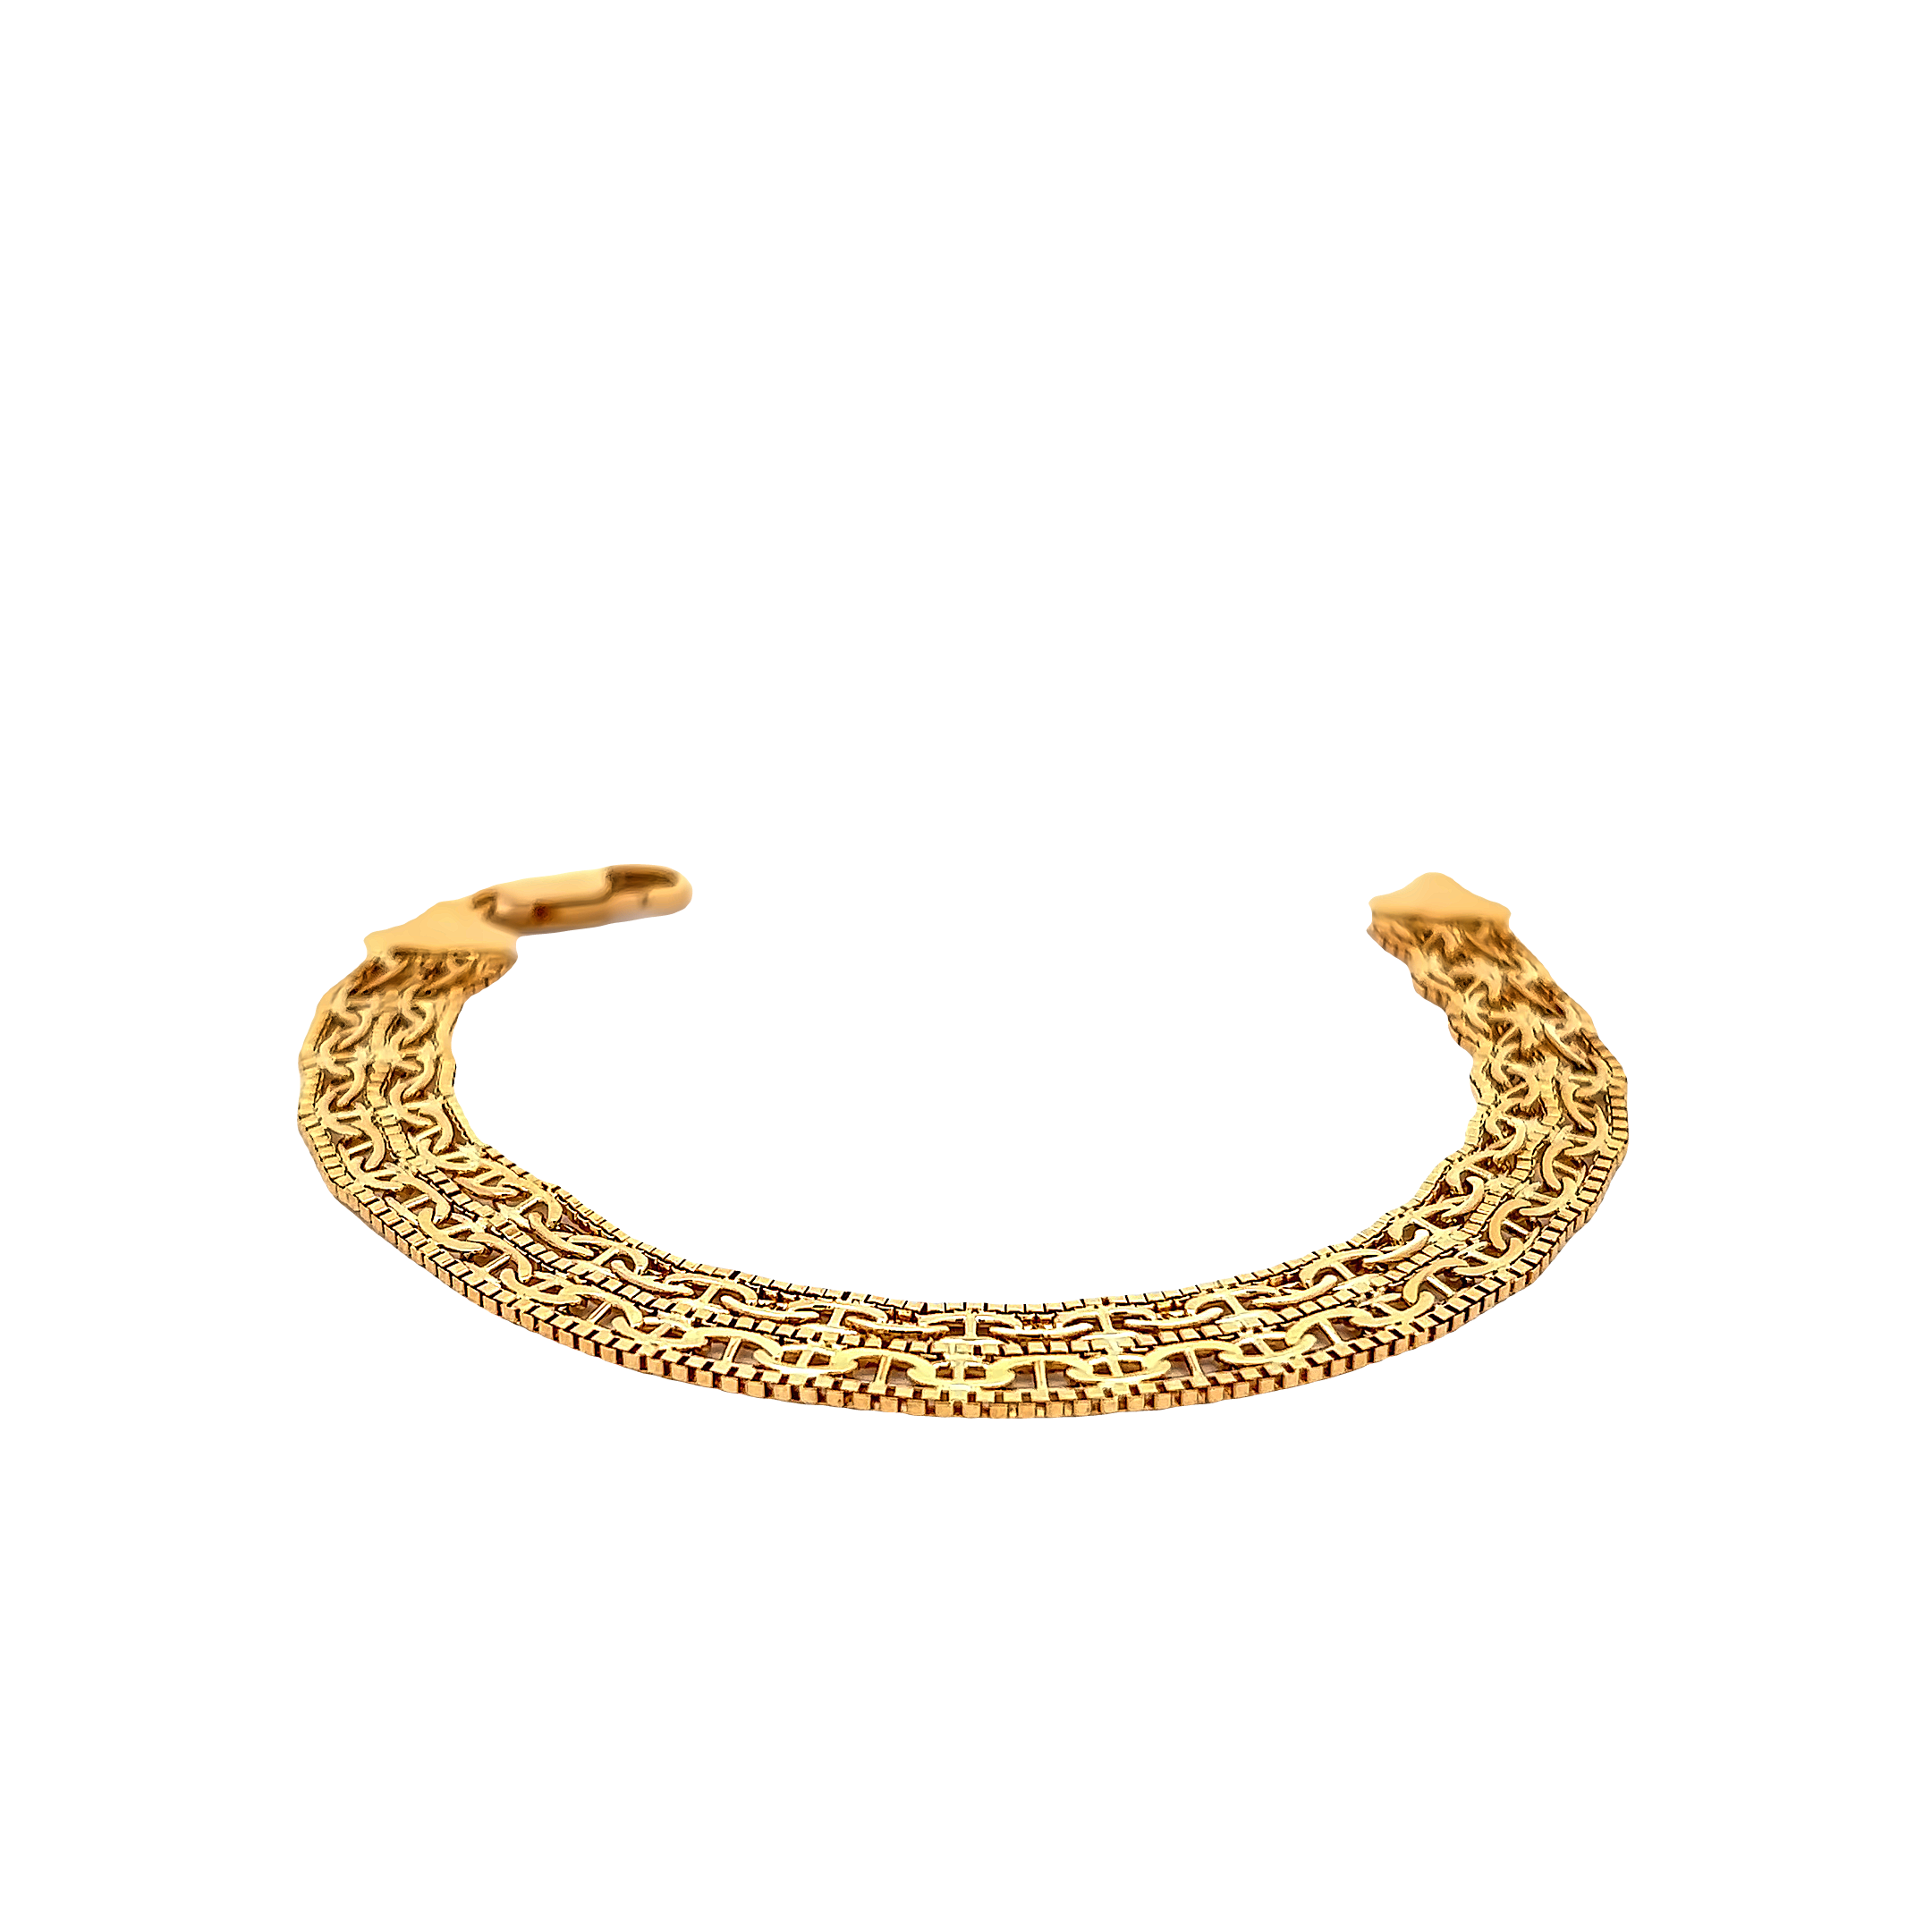 18 Karat yellow gold bracelet with three rows of box chain and two rows of marinier link. Length 7.5